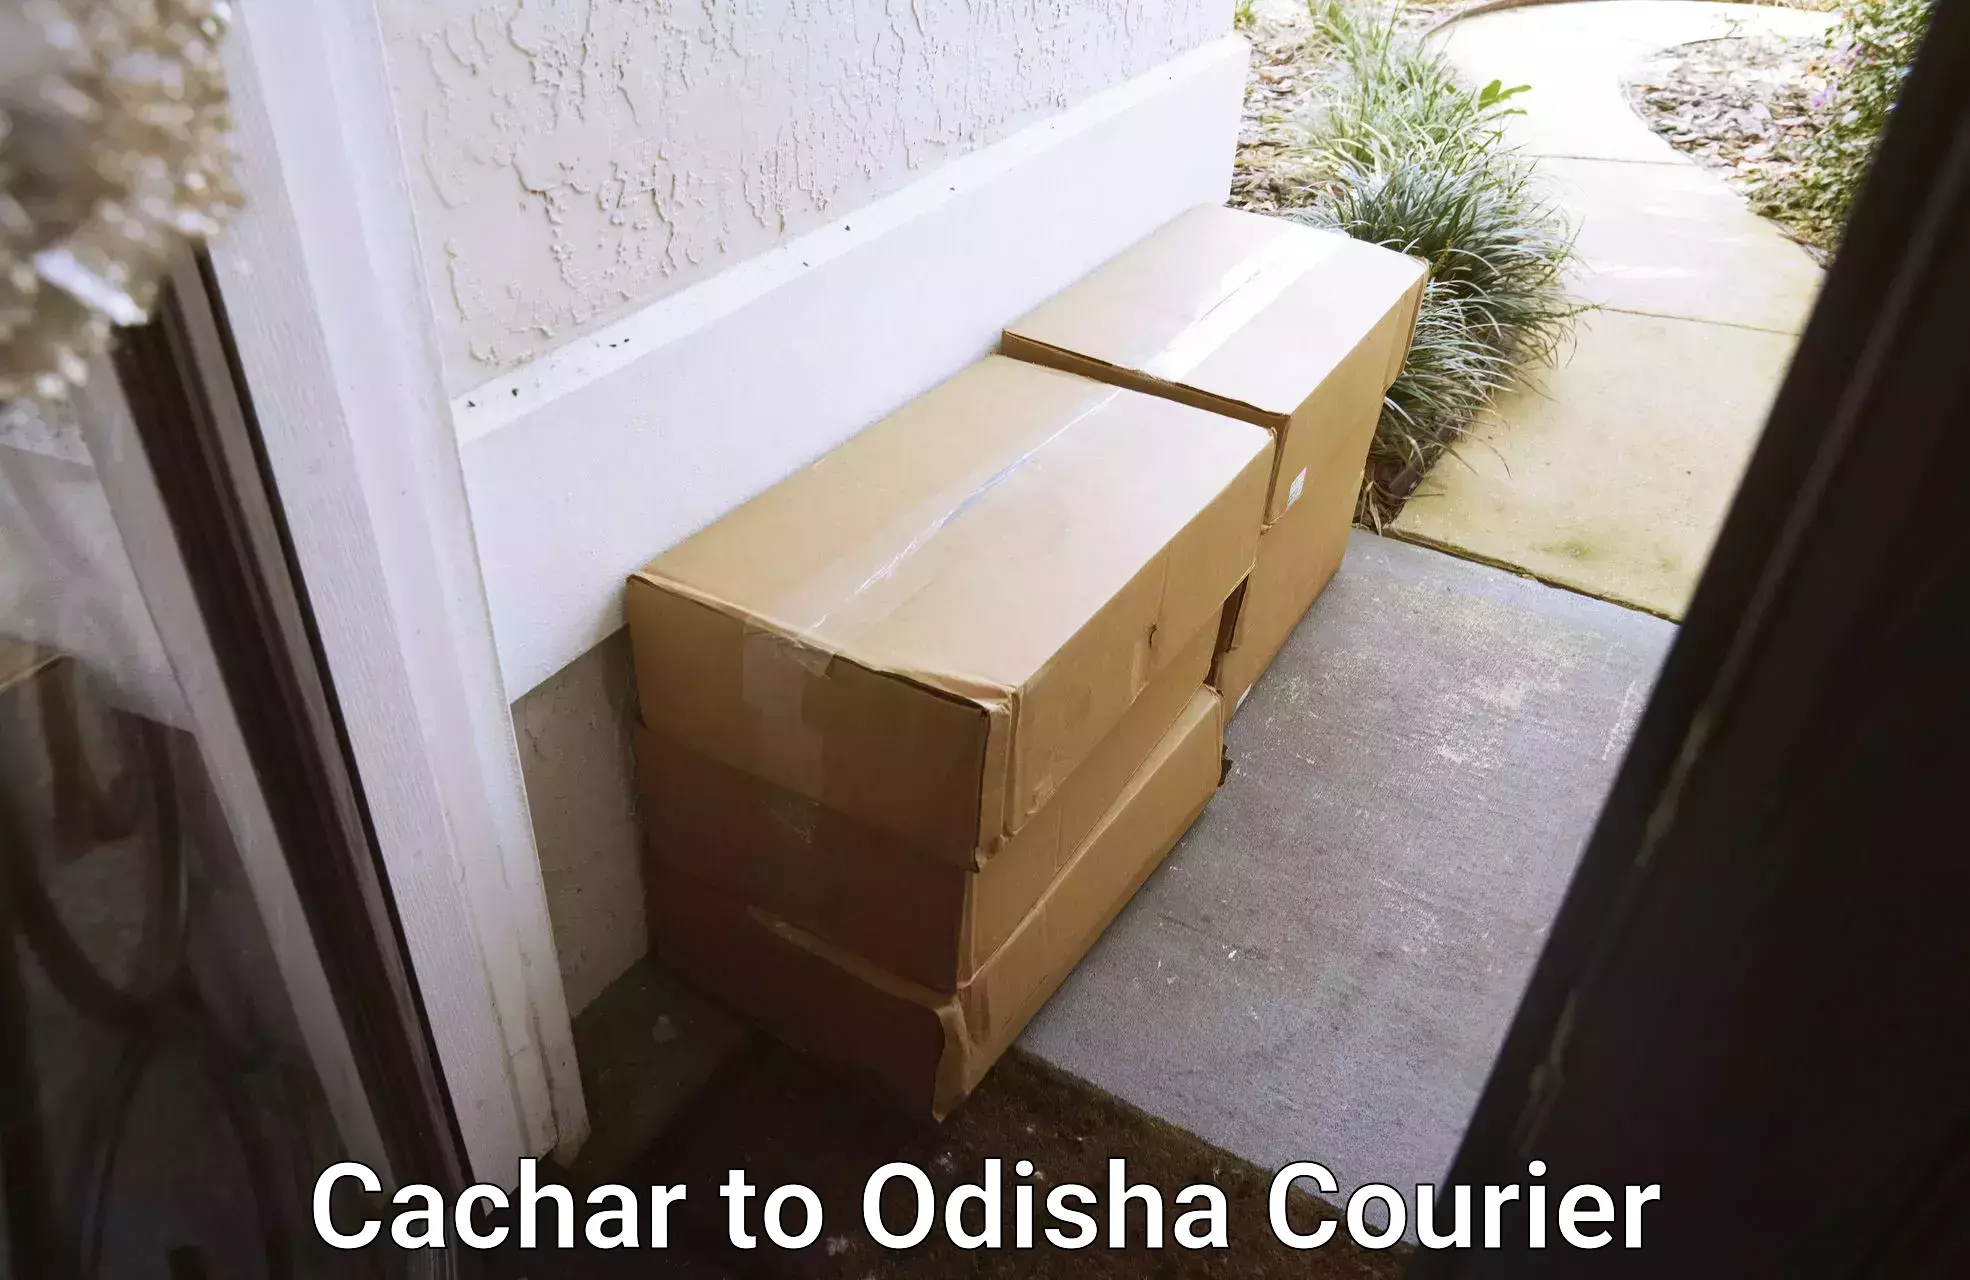 Parcel handling and care Cachar to Keonjhar